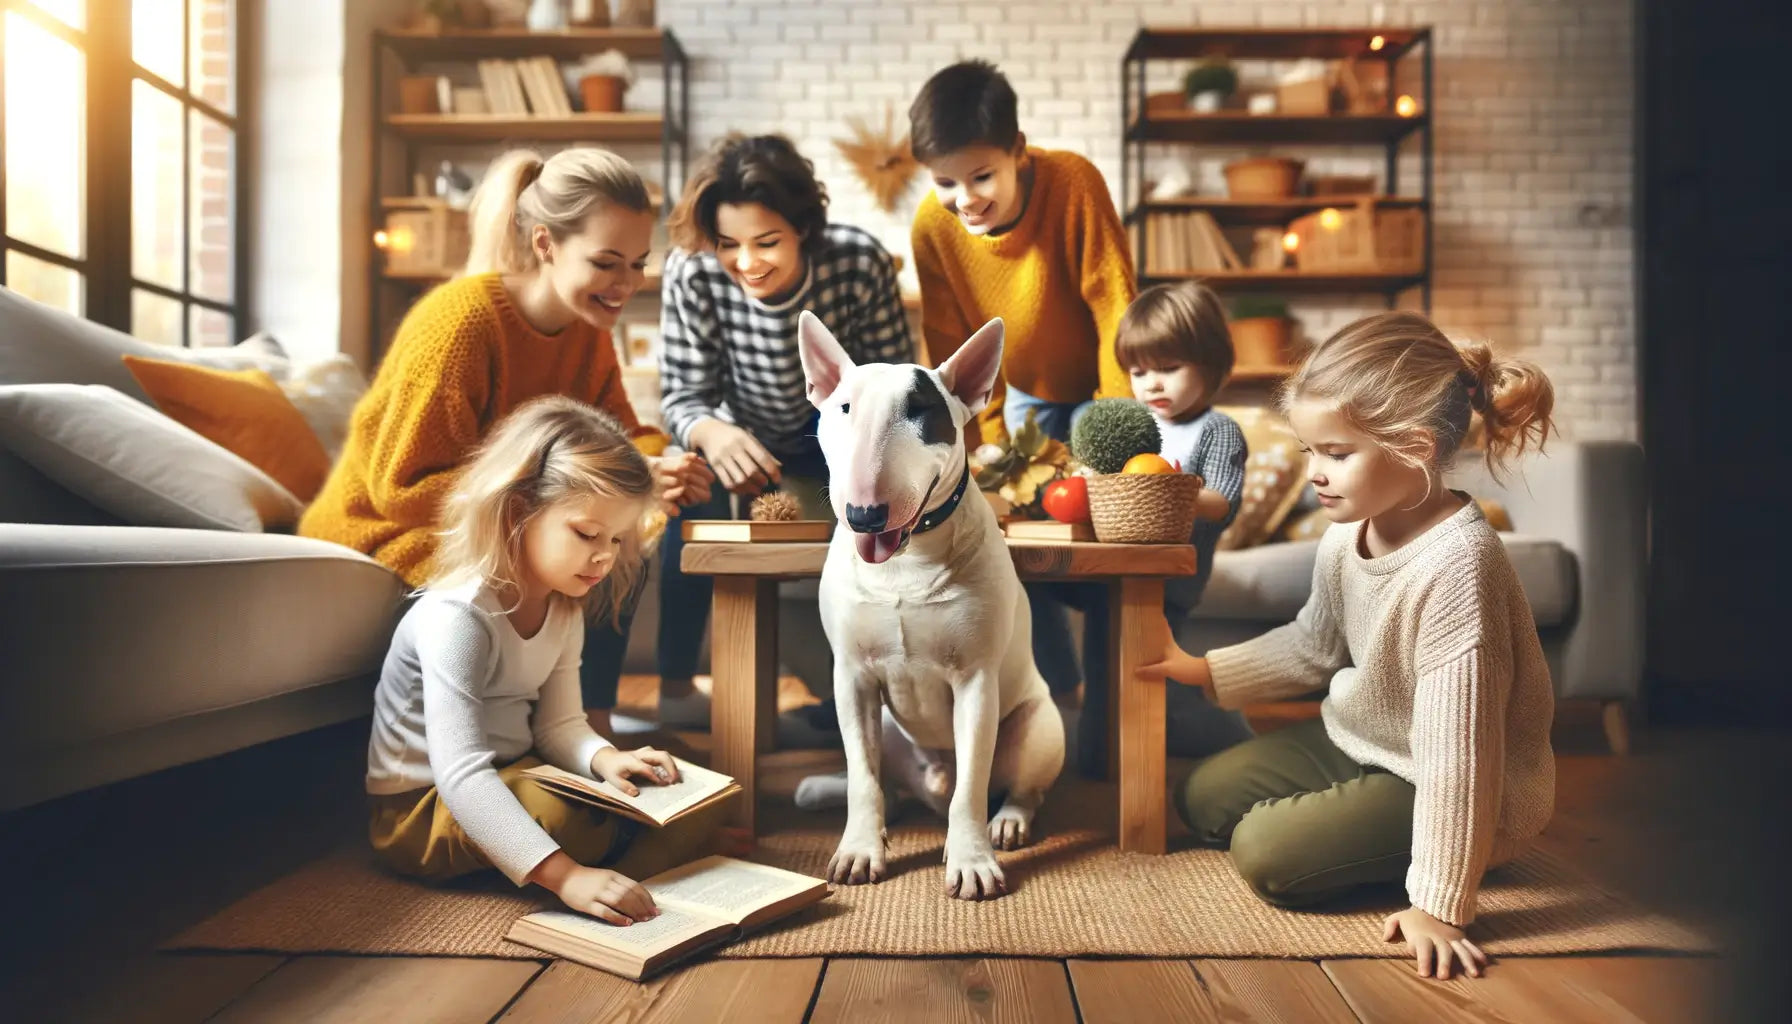 A Bull Terrier is surrounded by a loving family in a cozy home setting.